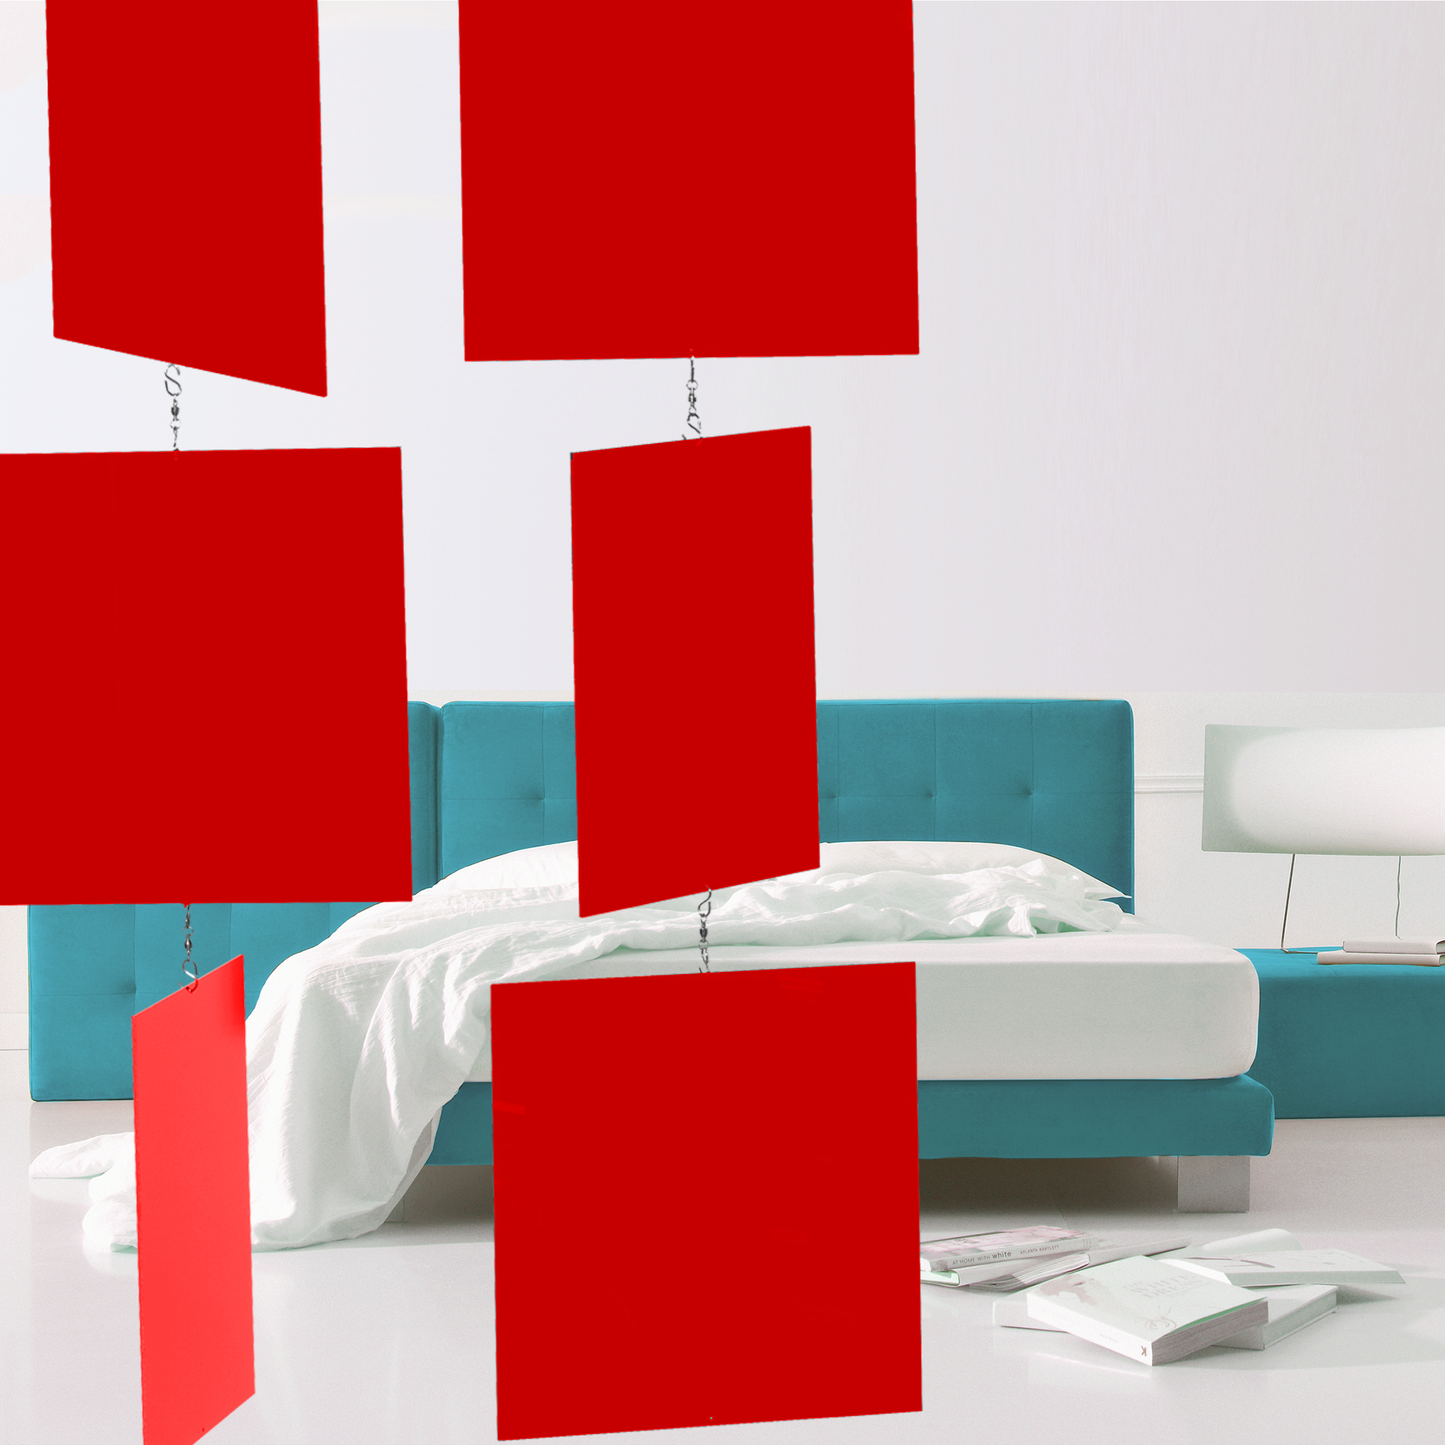 Modernist bedroom with aqua bed frame, white linens, books and a modern lamp with red MODcast kinetic hanging art mobiles / room divider - handmade in Los Angeles by AtomicMobiles.com